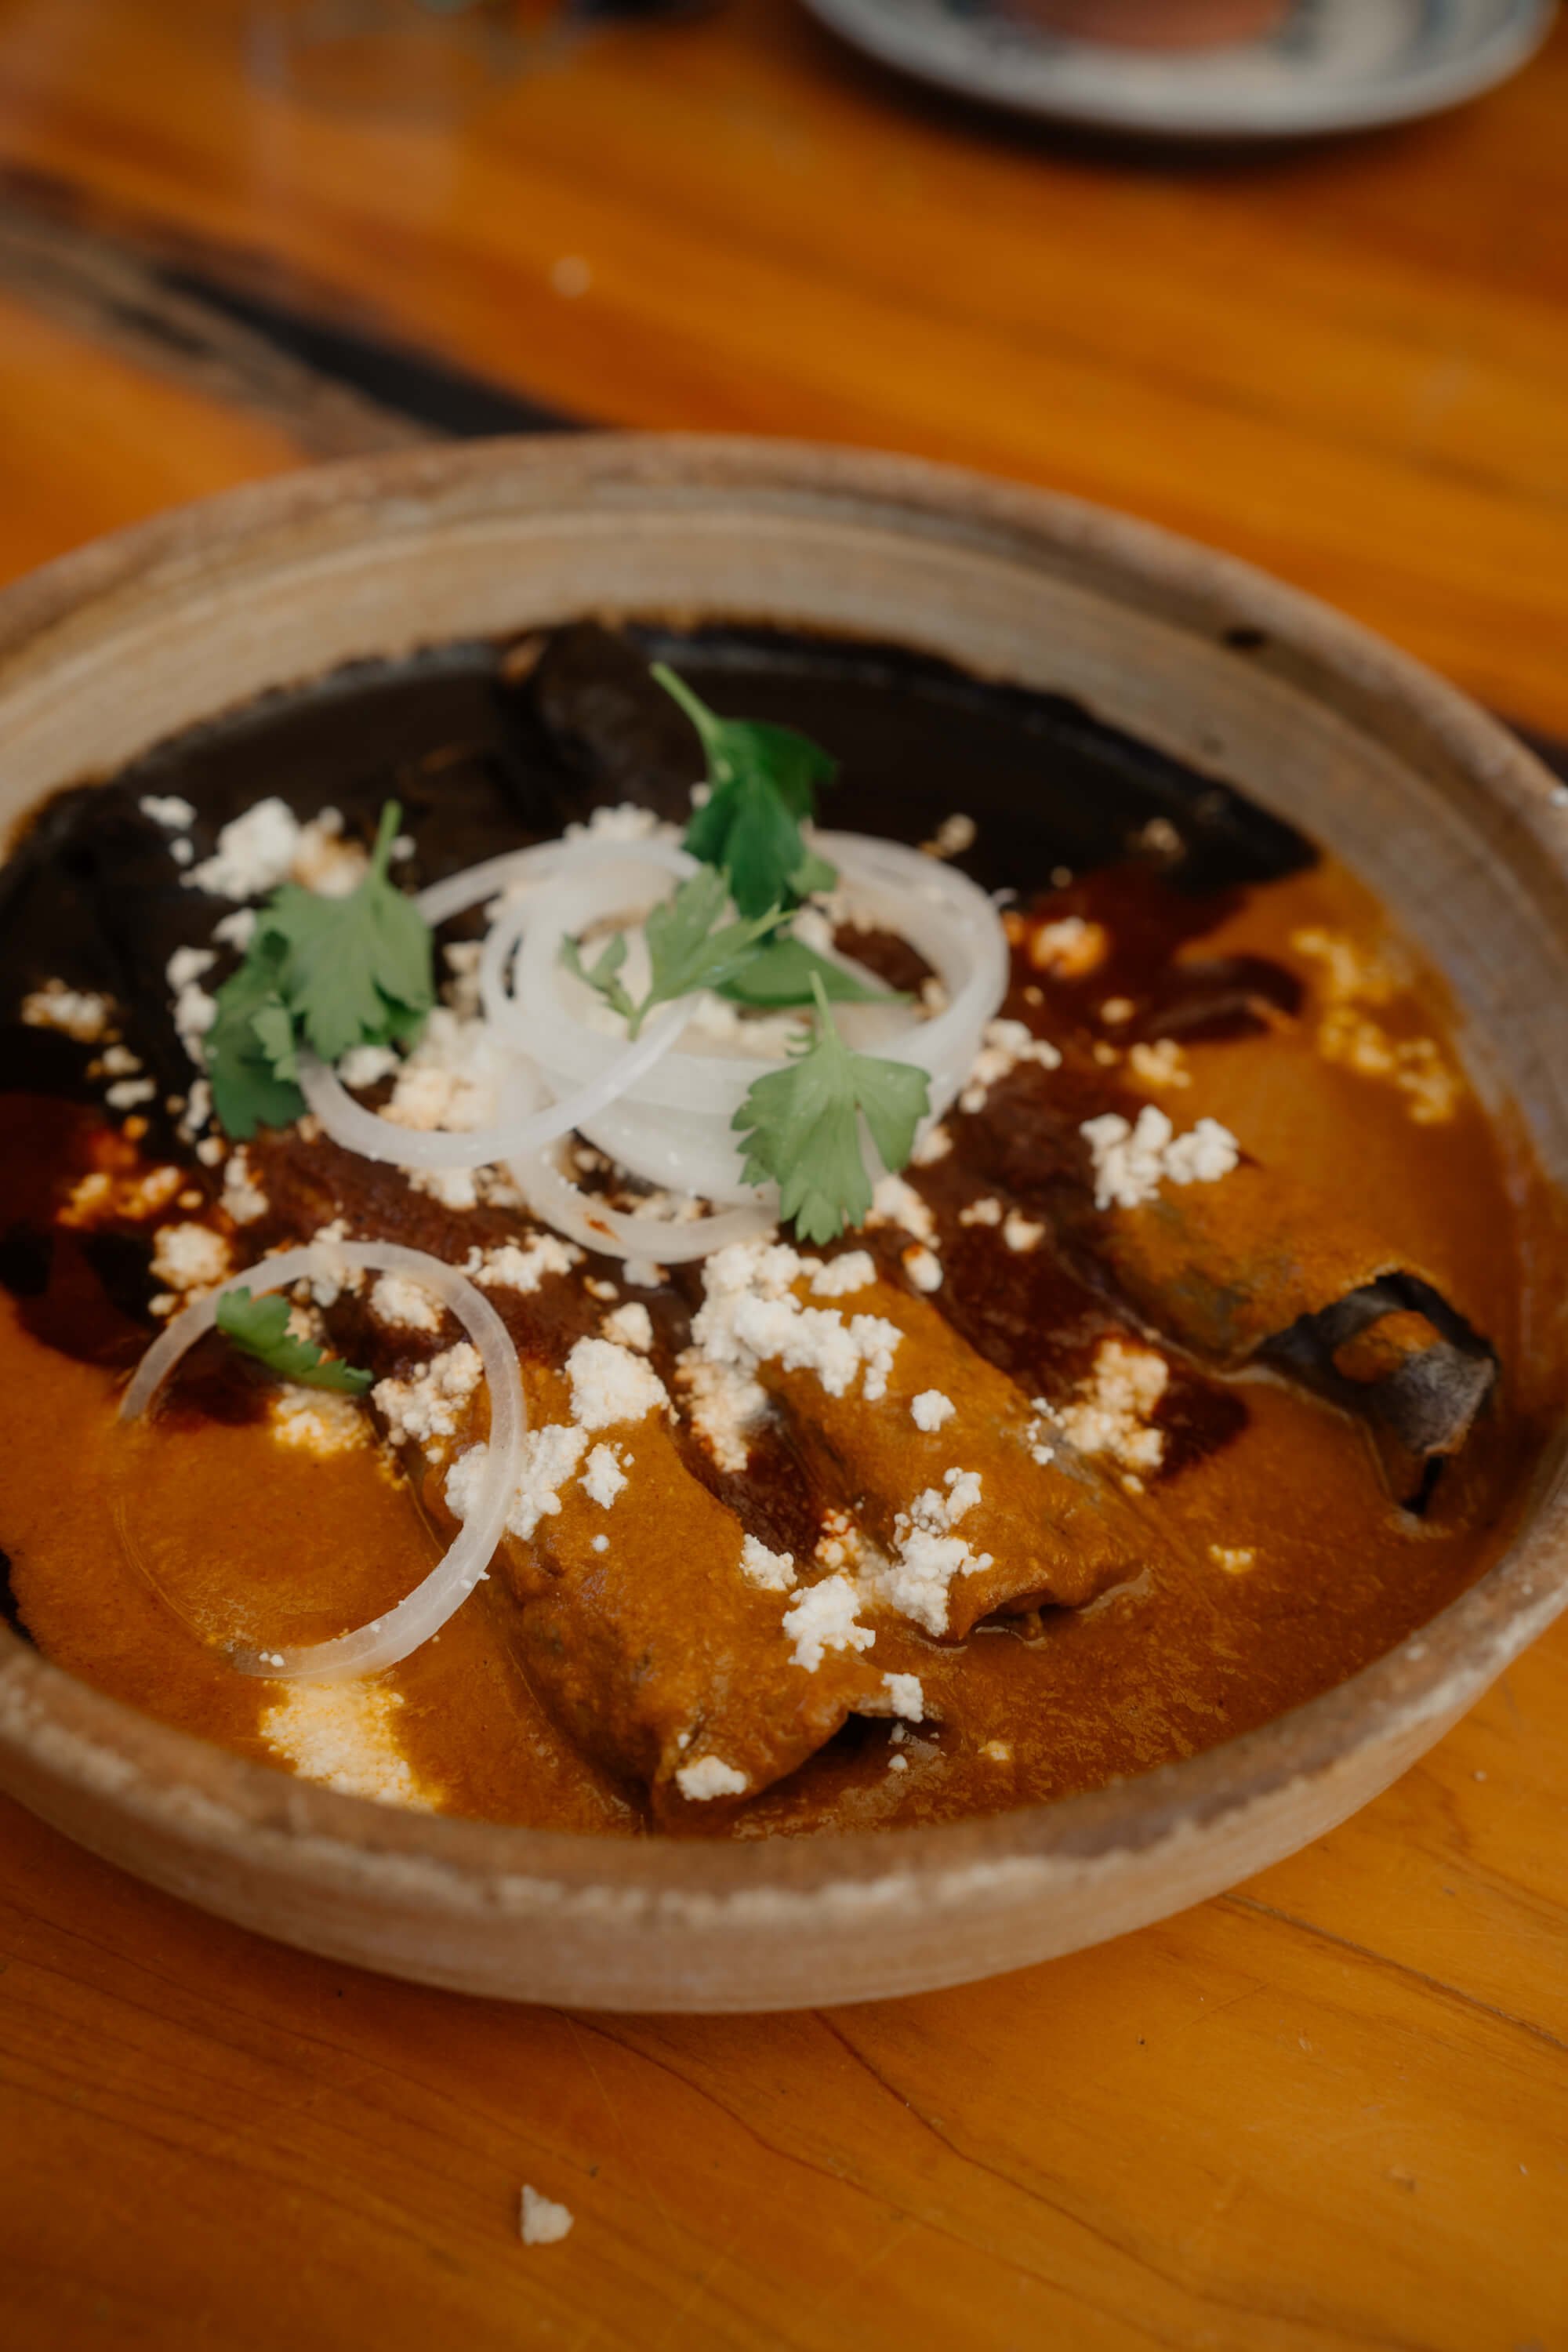 Traditional dish with mole sauce.